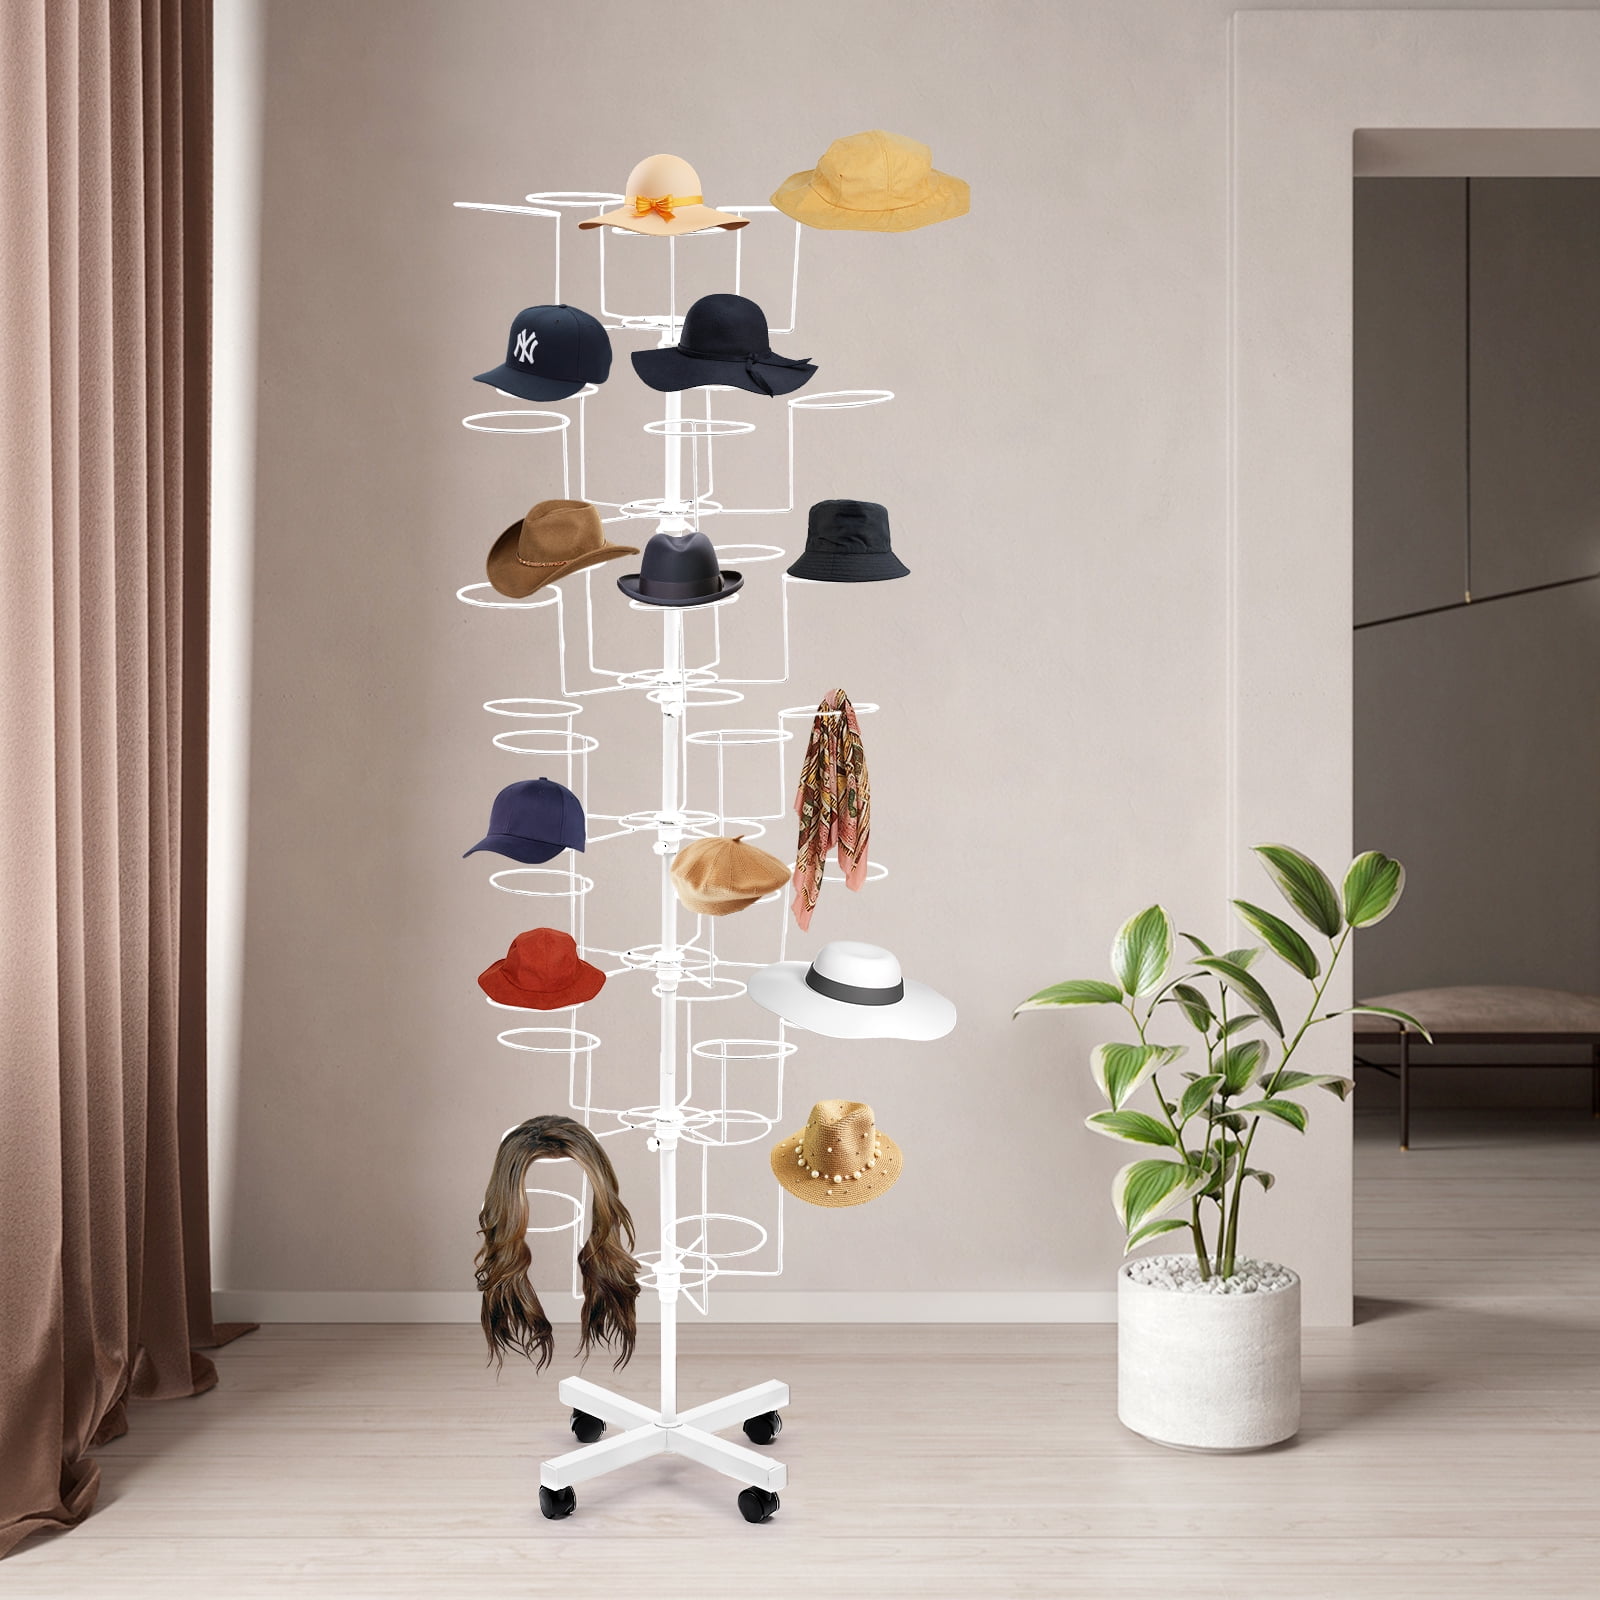 Freestanding Revolving Hats Rack Stand Rotating 7 Tier 35 Hats Metal Hats Display Organizer with Wheels White 21 65 21 65 64 96 1ac3b997 c8ba 4c41 ba34 f211008a5088.36f60e18d5ed87cac9ec96c83a024cff